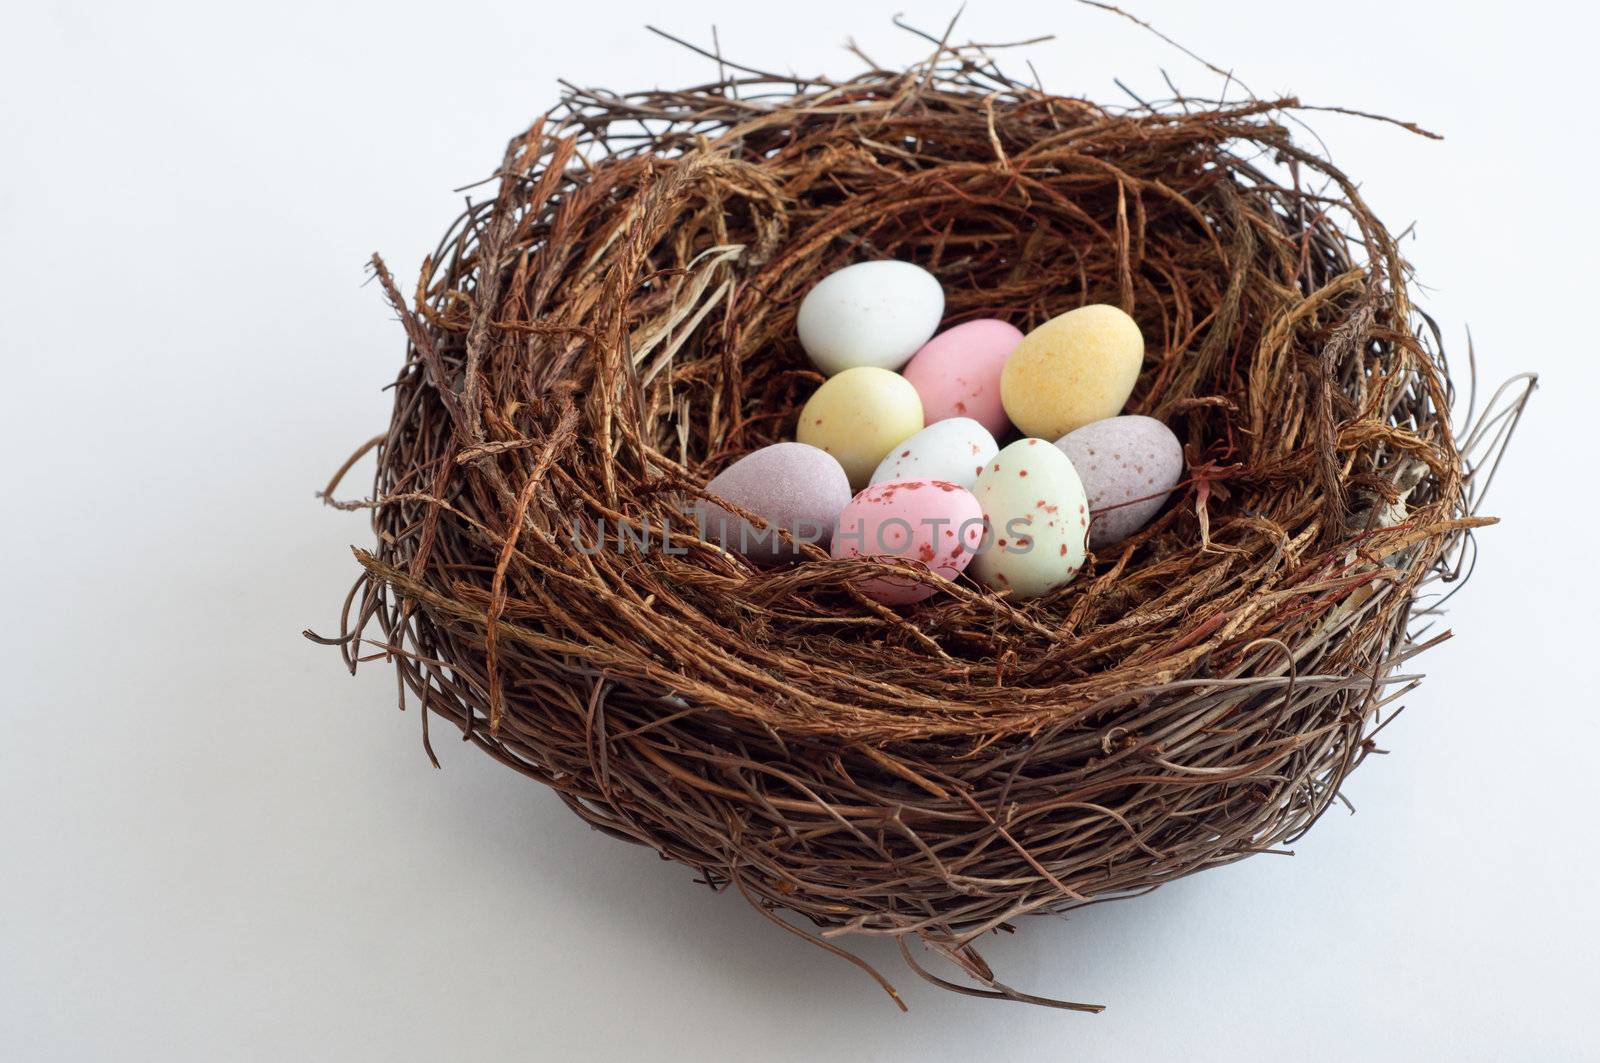 Whole object shot of colourful Easter egg sweets in a woven twig bird's nest.